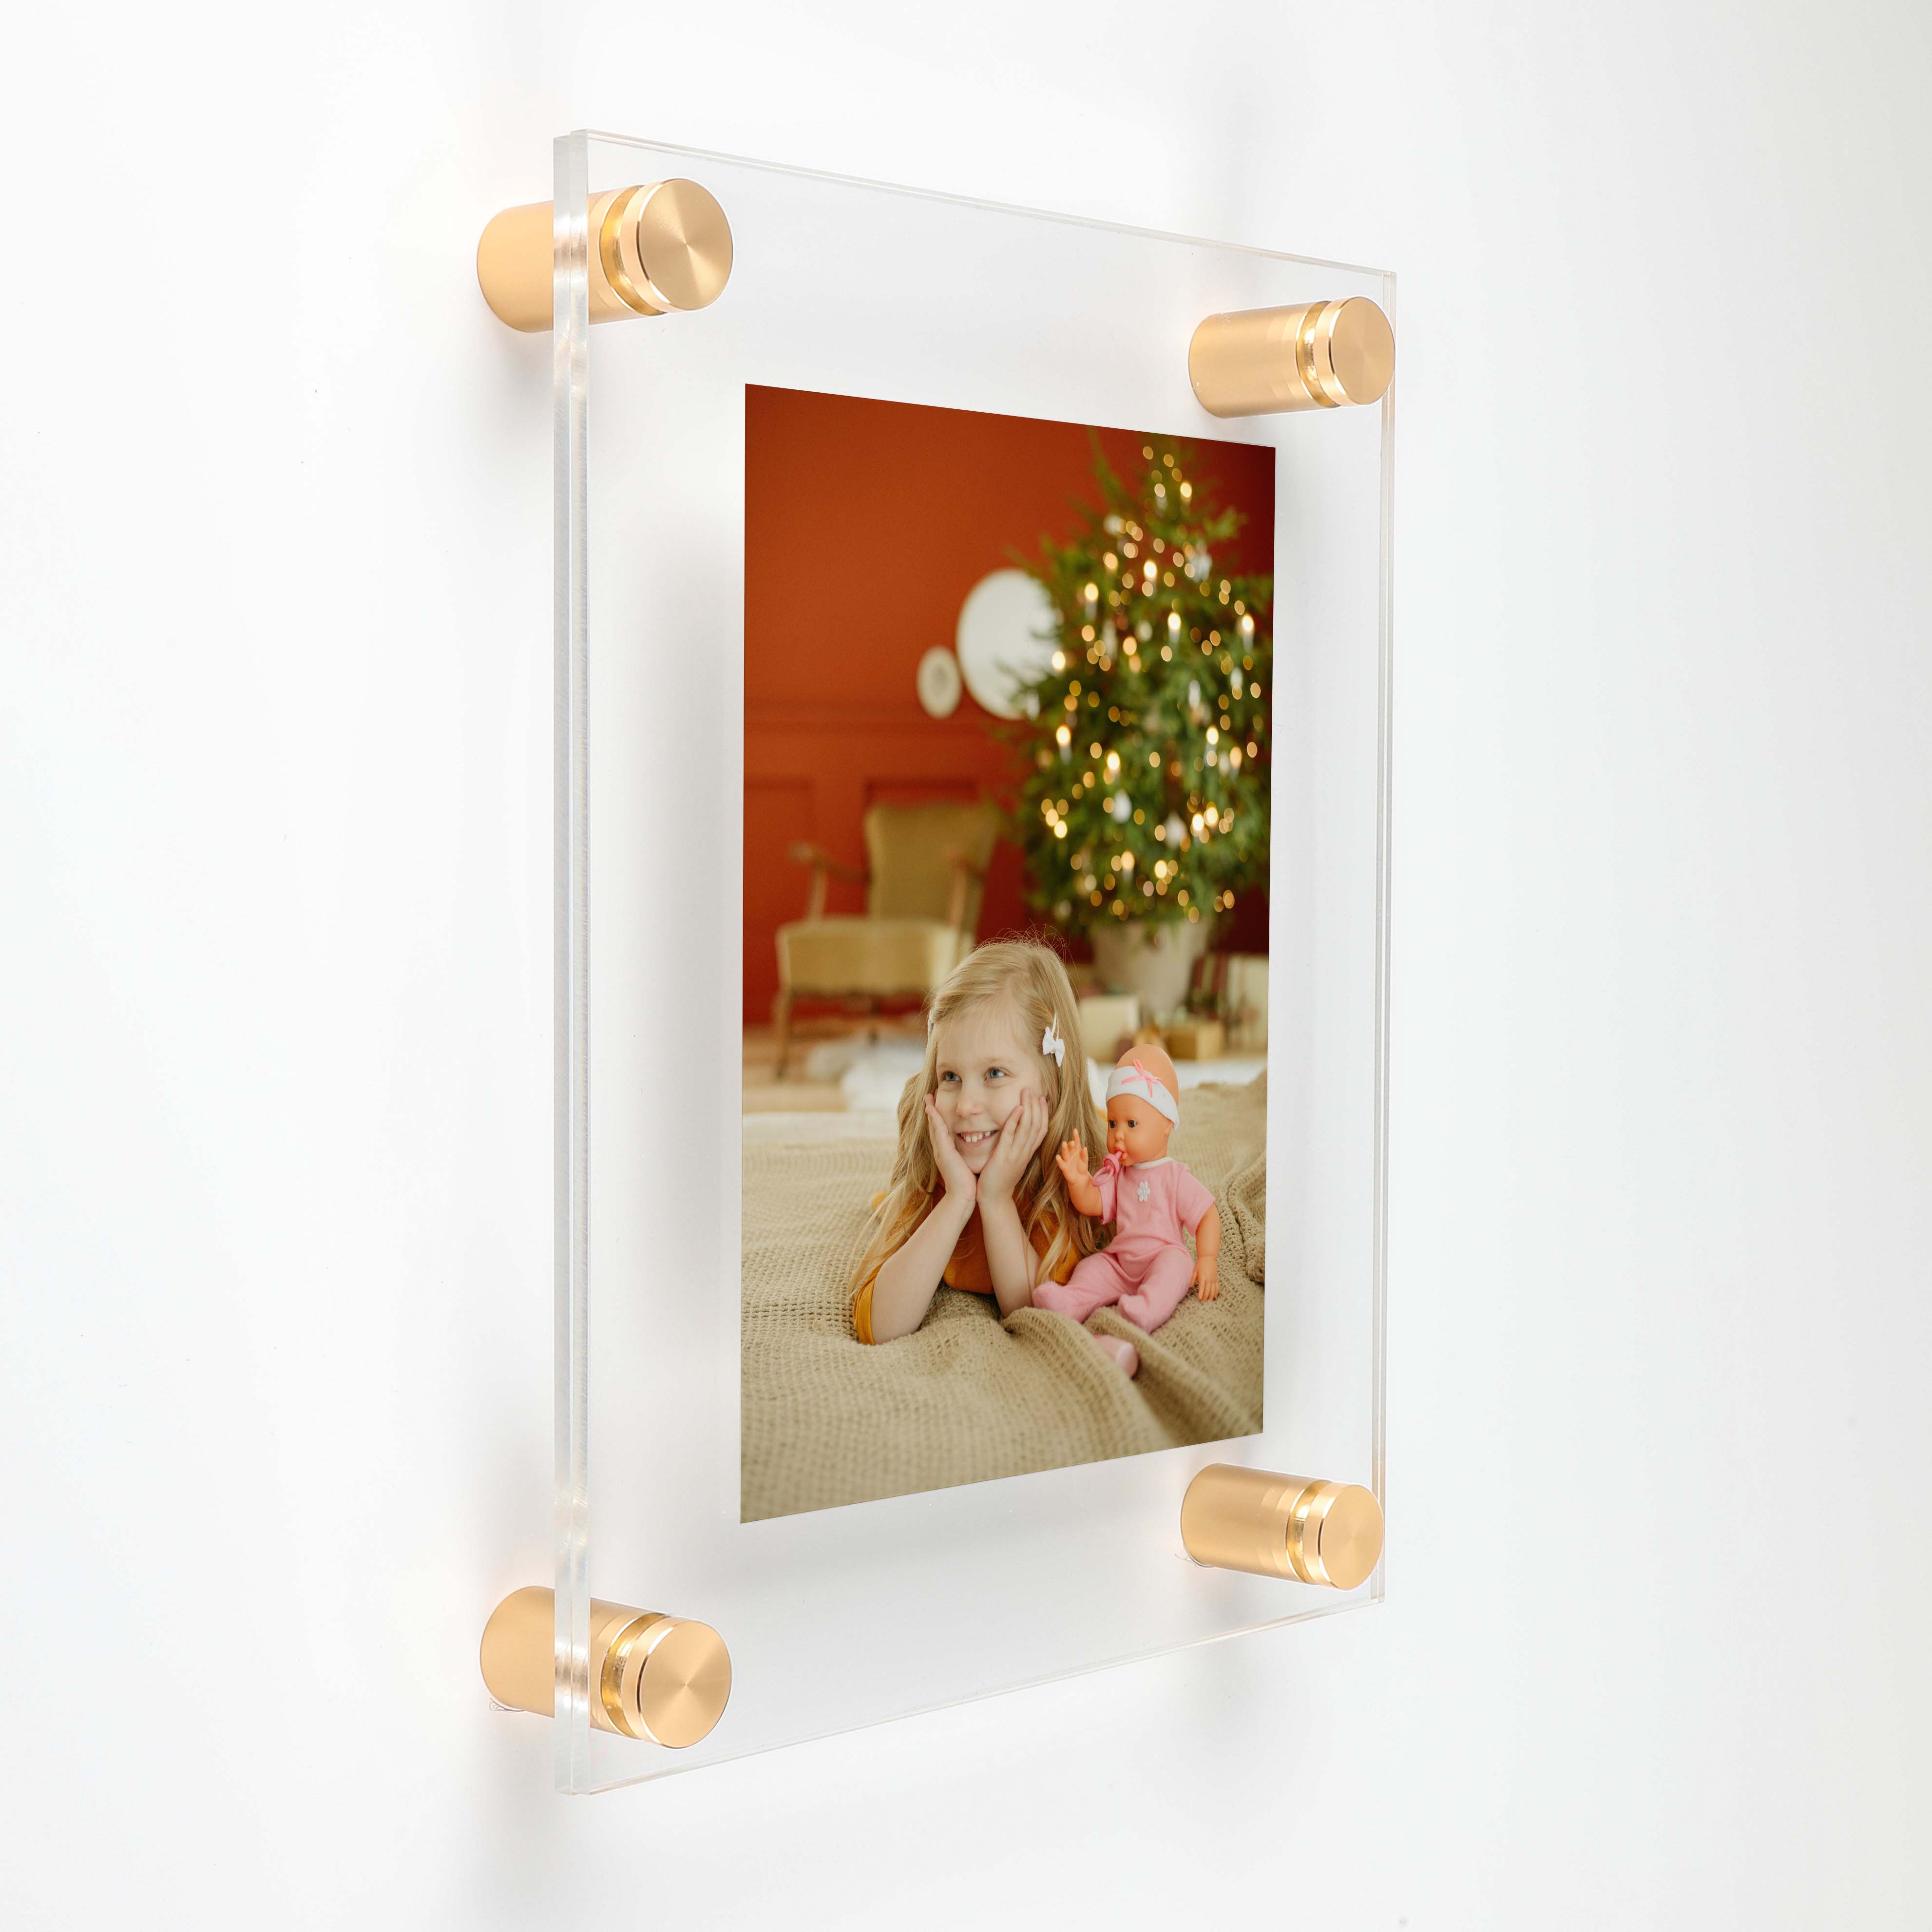 (2) 27'' x 39'' Clear Acrylics , Pre-Drilled With Polished Edges (Thick 3/16'' each), Wall Frame with (6) 5/8'' x 1'' Champagne Anodized Aluminum Standoffs includes Screws and Anchors